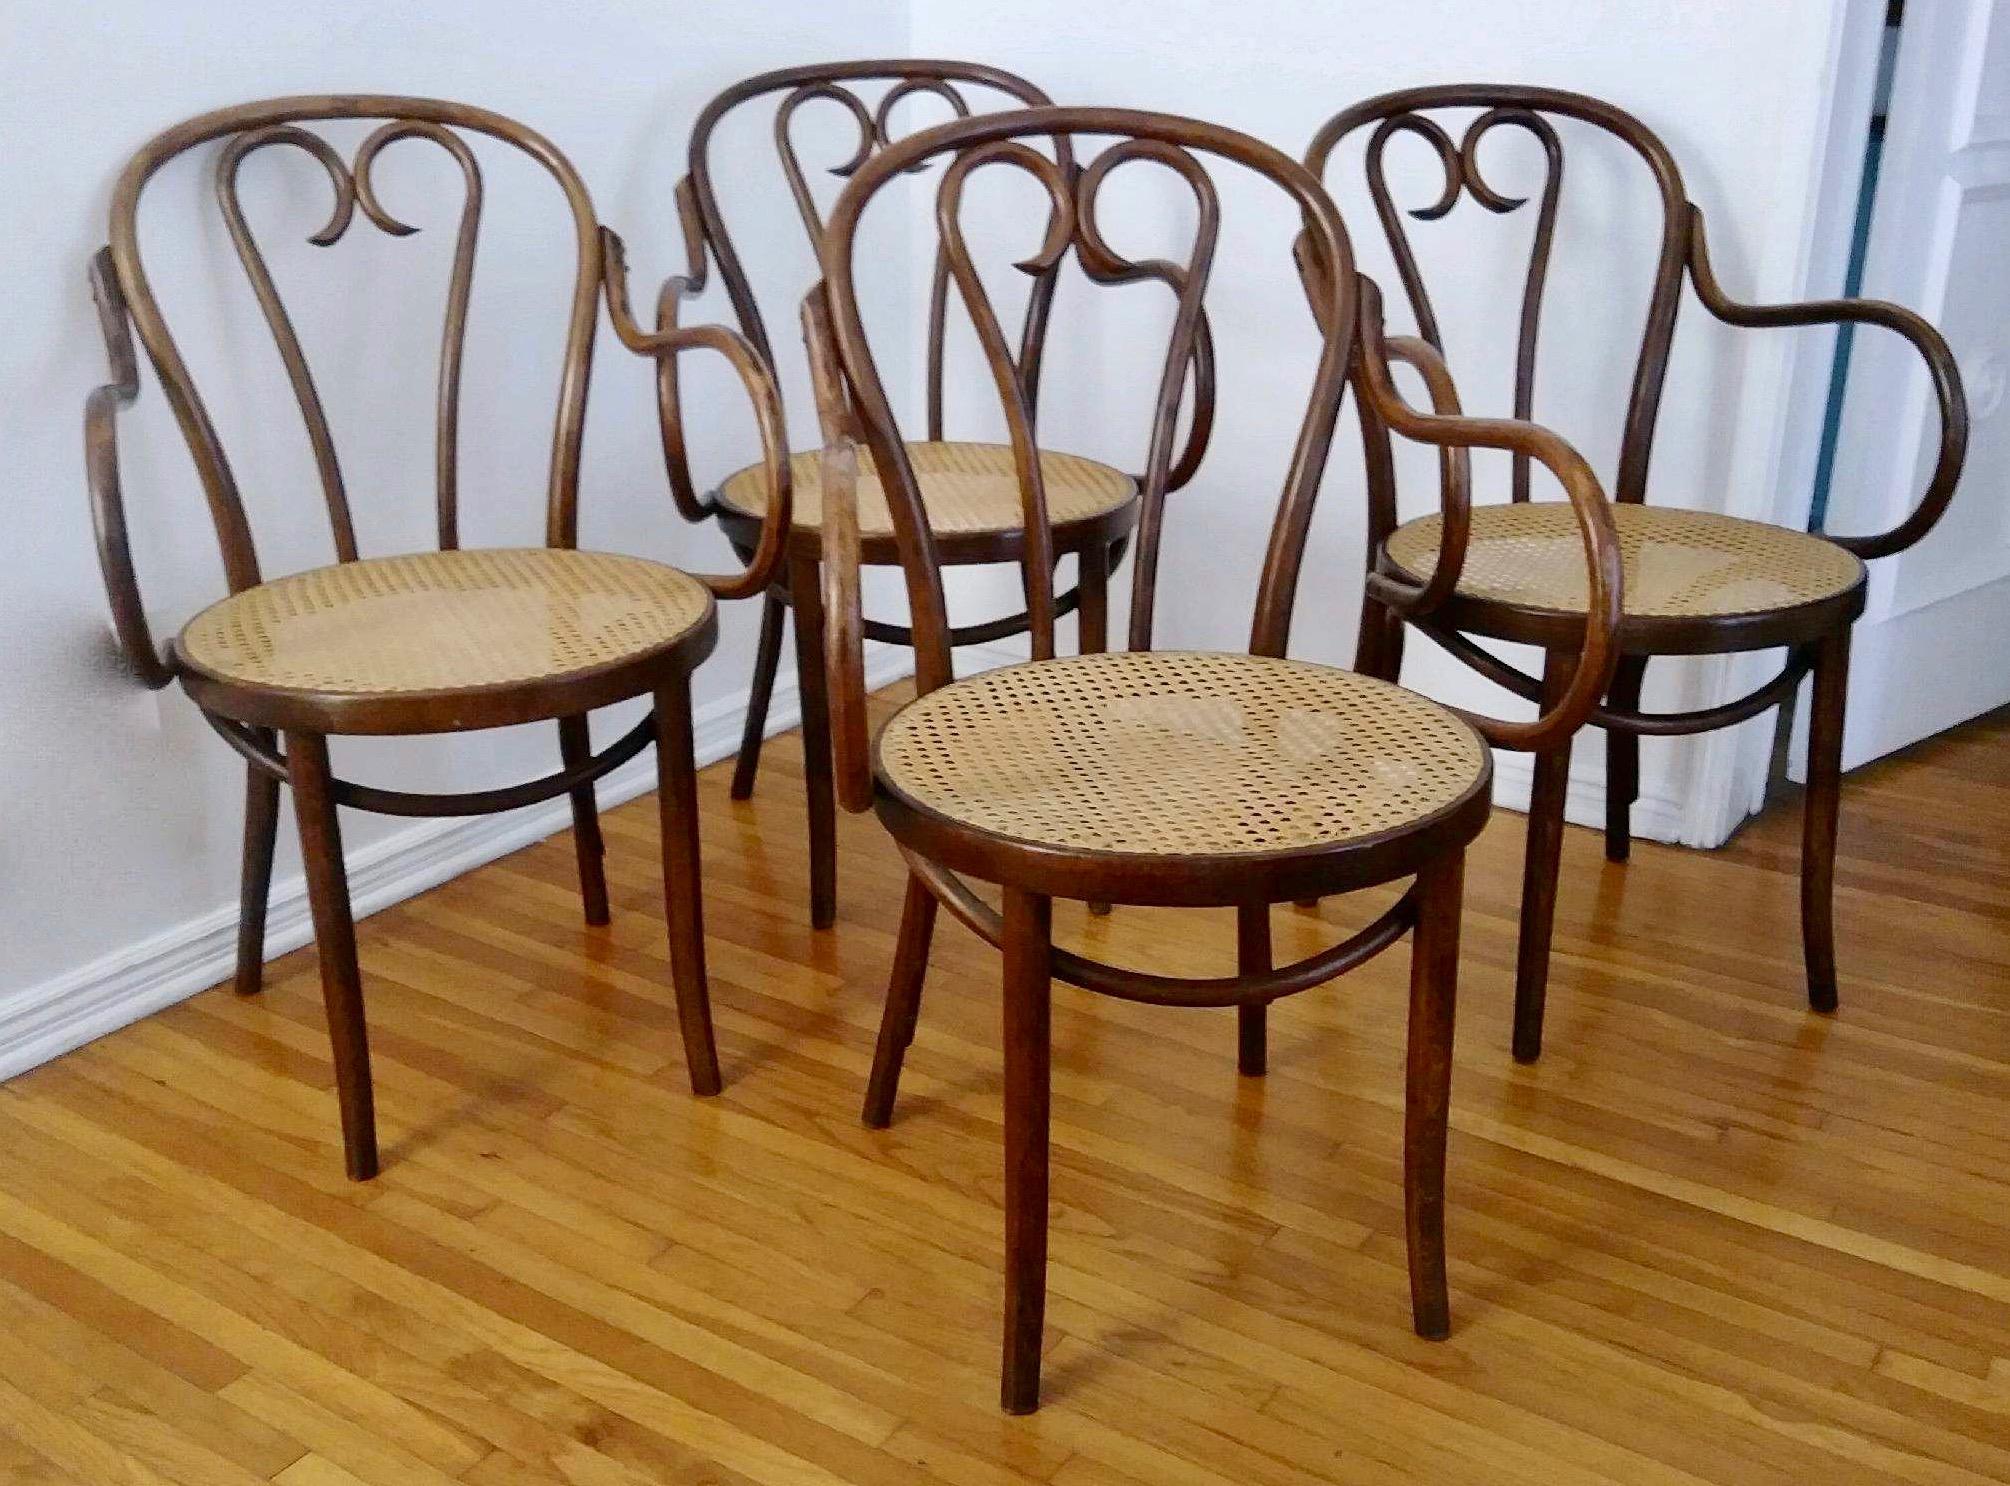 Thonet, ZPM Radomsko chair - a handsome set of four chairs perfect for the dining room, game table or side. Bentwood with cane seats all in wonderful condition. Wood is aged and patinated beautifully due to wear.